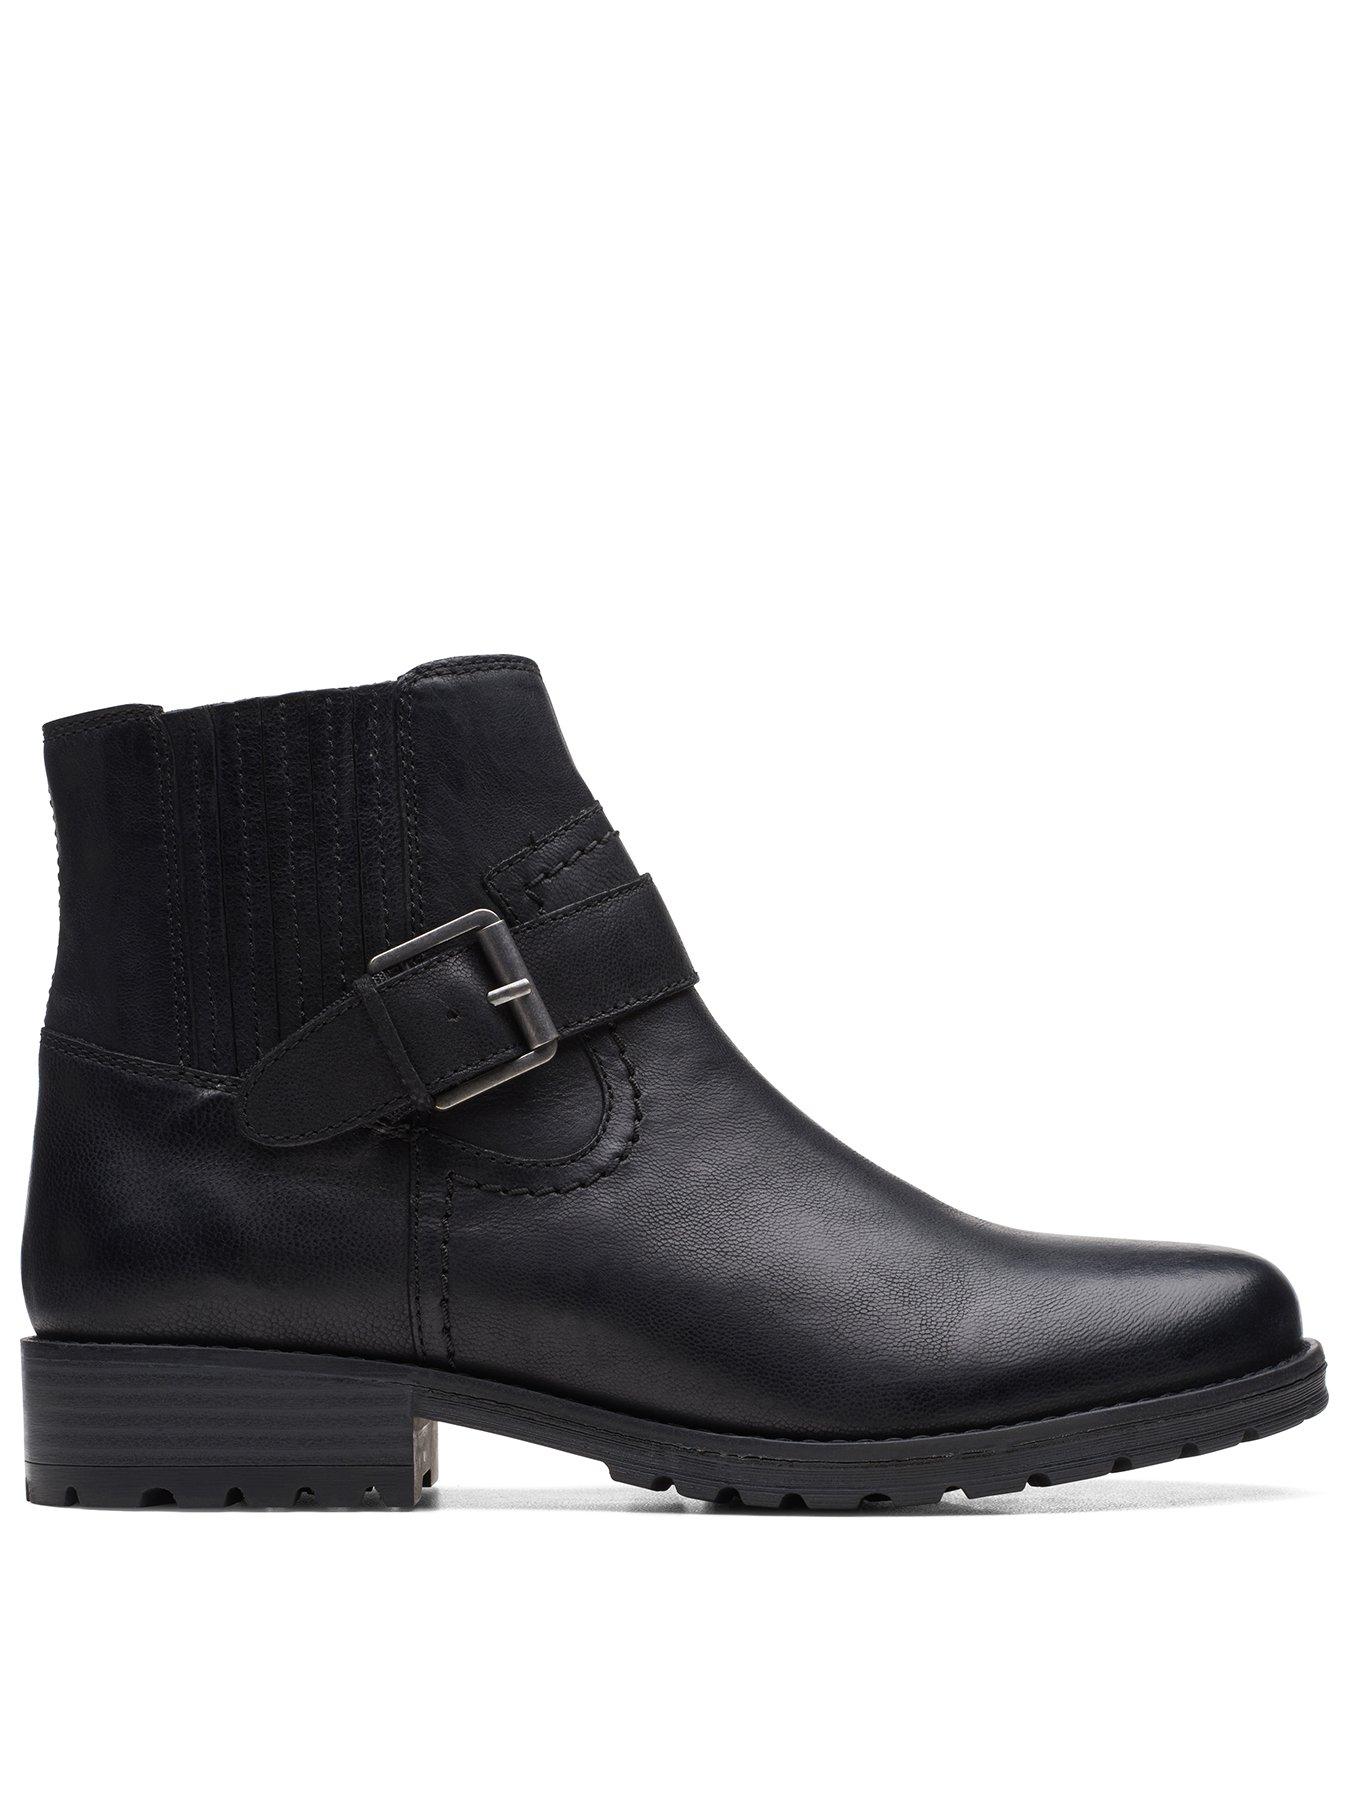 analogía Indirecto Comandante Clarks Clarkwell Strap Leather Ankle Boot - Black | Very Ireland